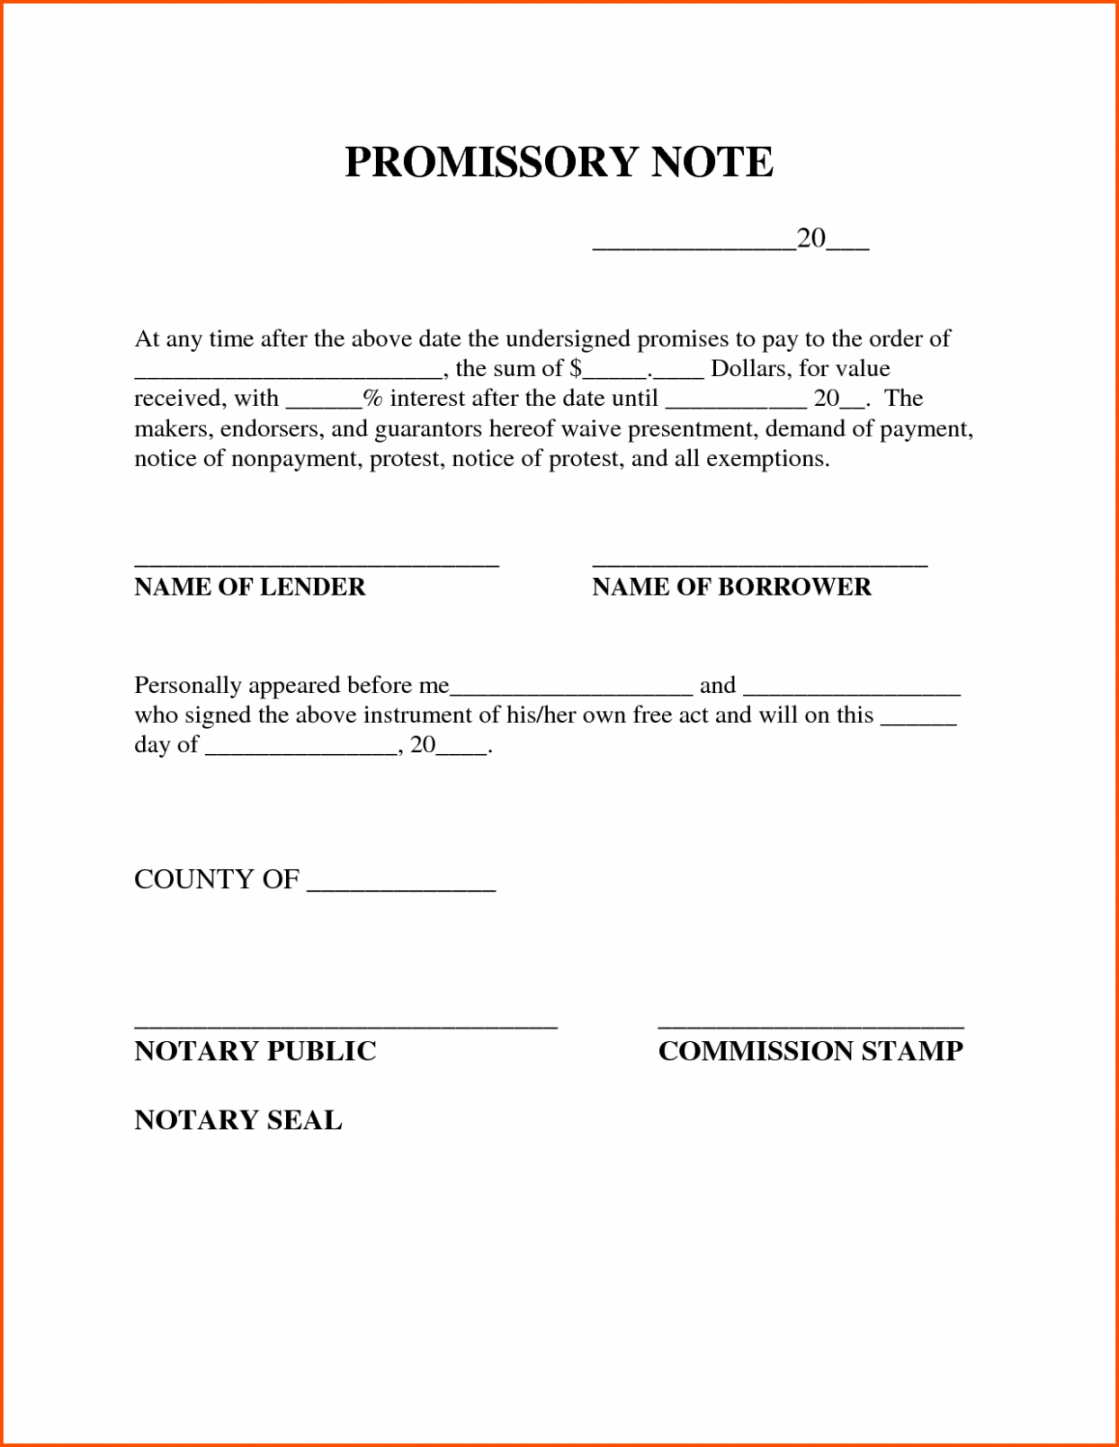 printable 11 sample format promissory note philippines in 2020  notes promissory note template for personal loan example